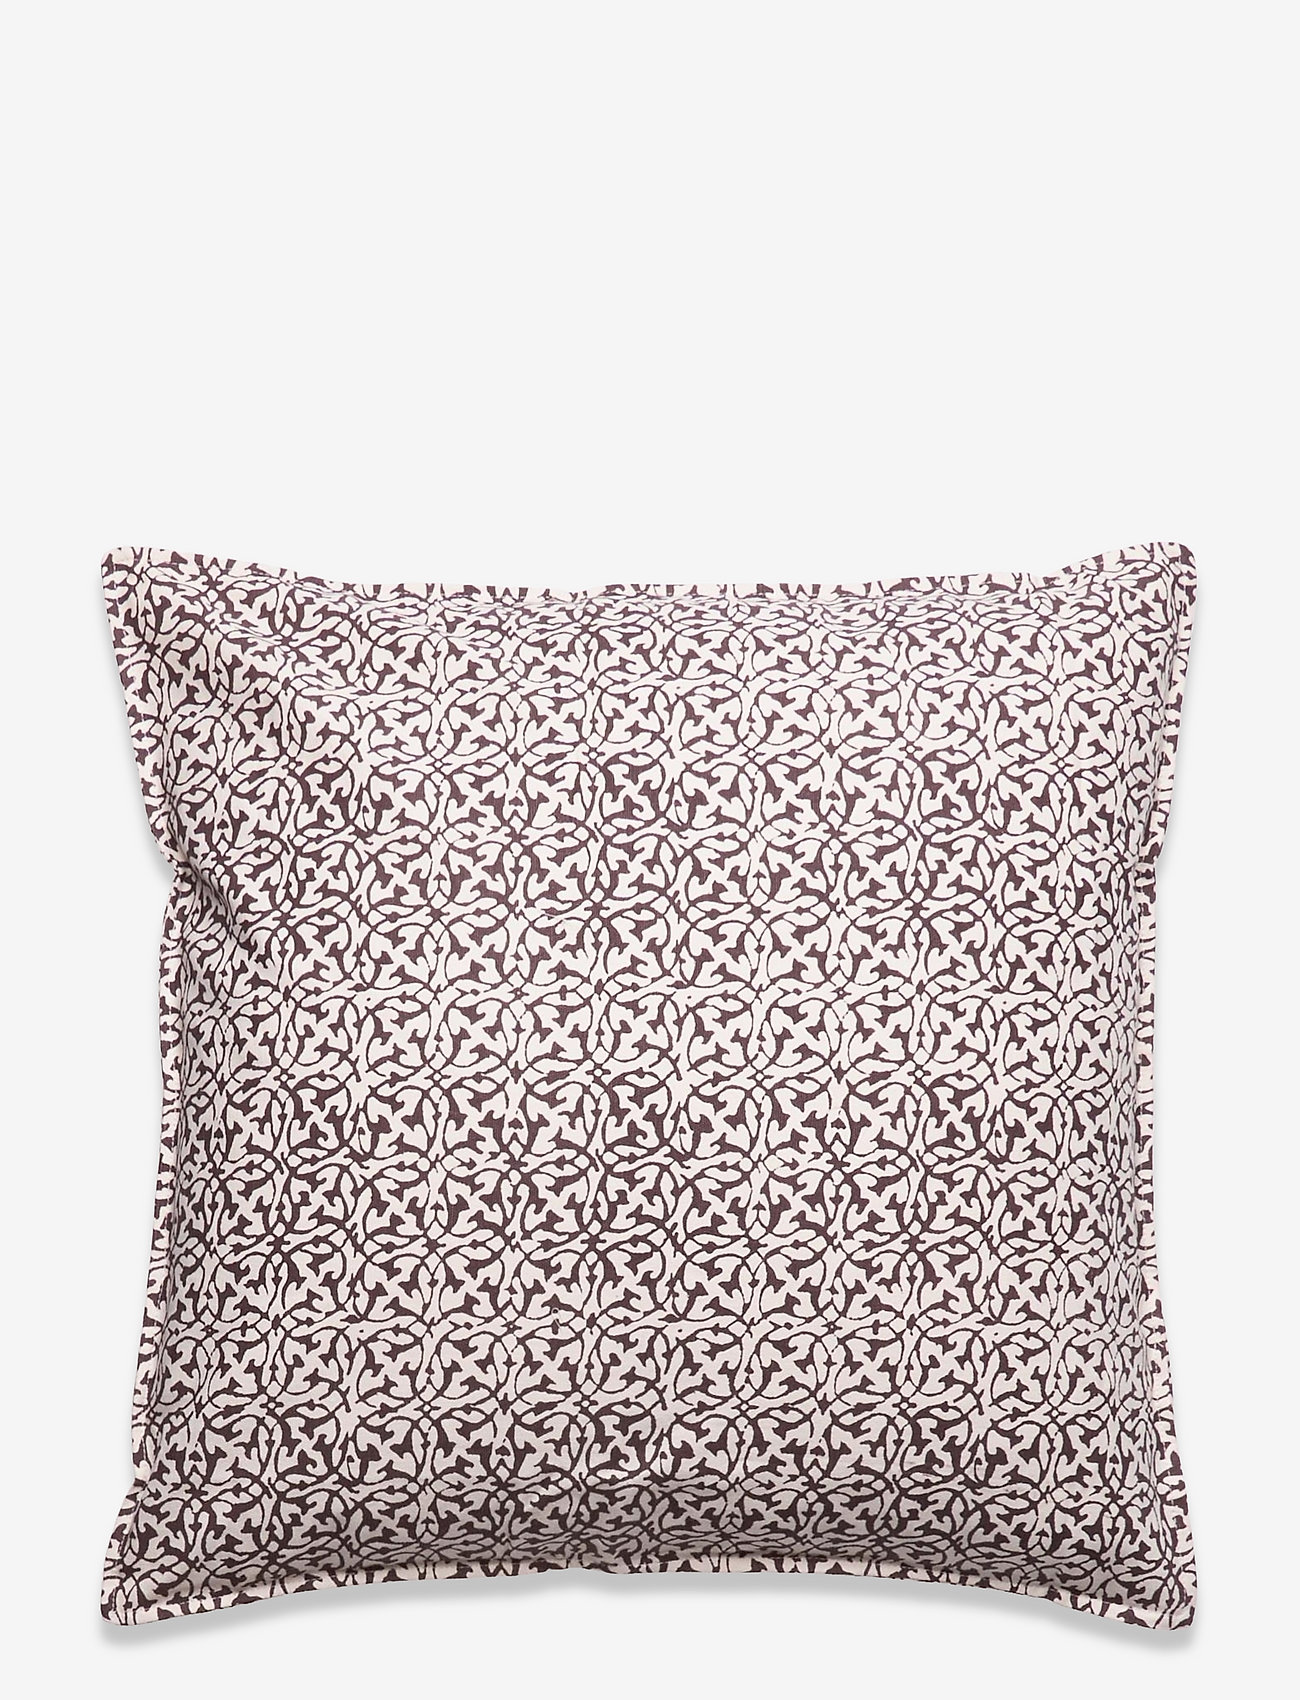 DAY Home - Day Twirl Cushion cover - laveste priser - brown; white - 0